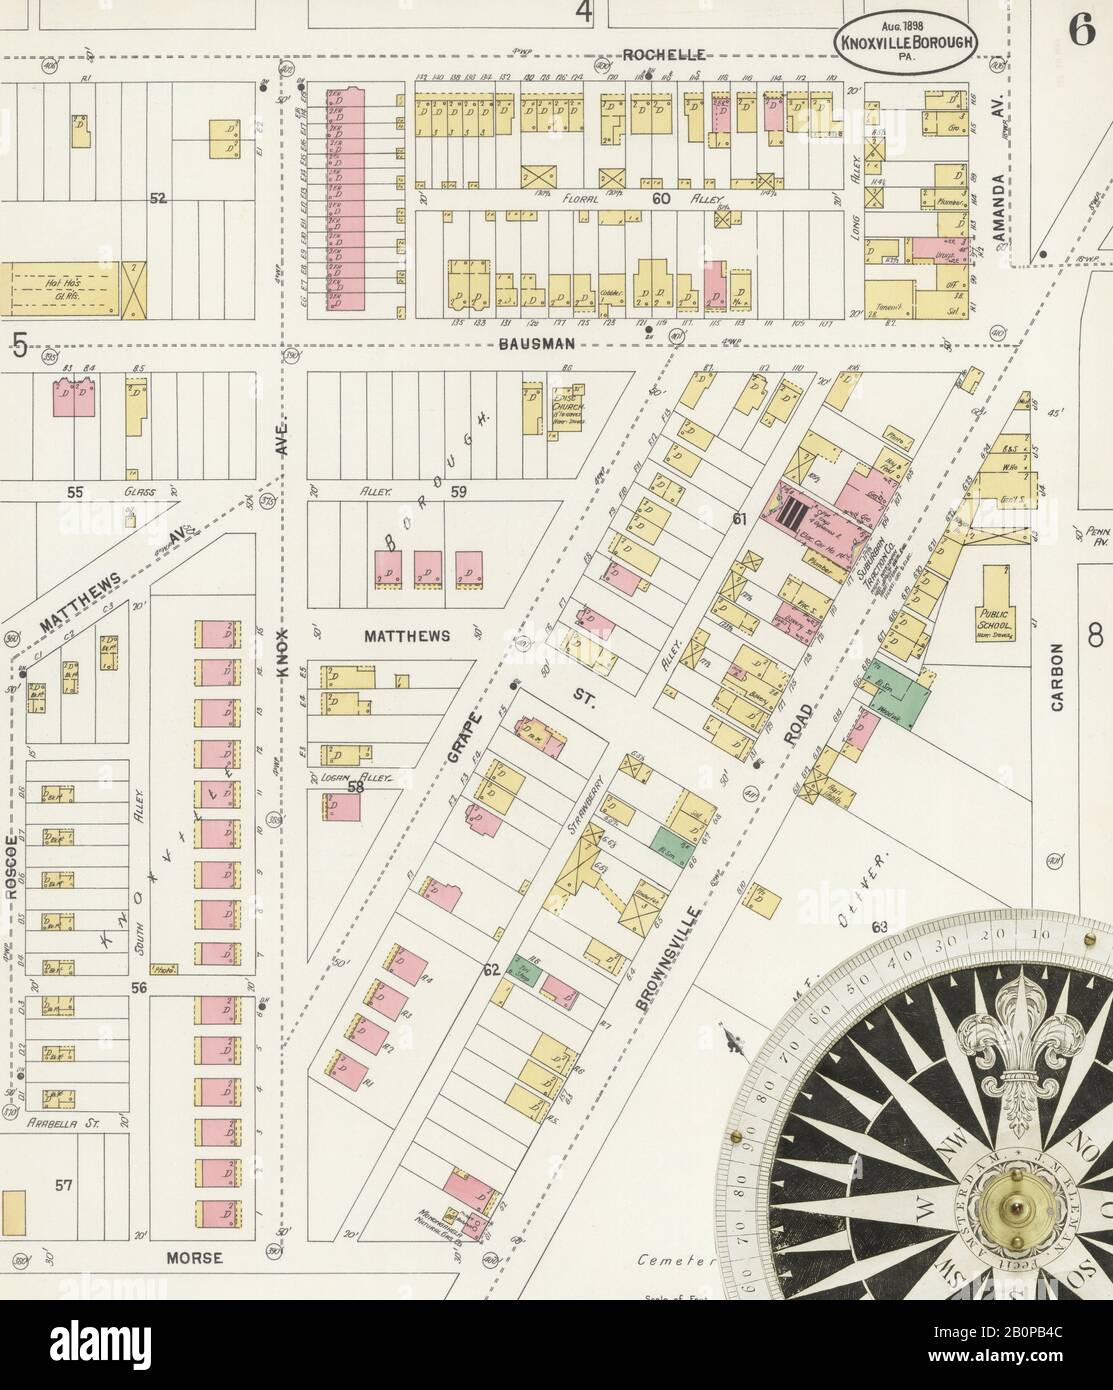 Image 6 of Sanborn Fire Insurance Map from Knoxville Borough, Allegheny County, Pennsylvania. Aug 1898. 8 Sheet(s). Acquired after 1981, America, street map with a Nineteenth Century compass Stock Photo